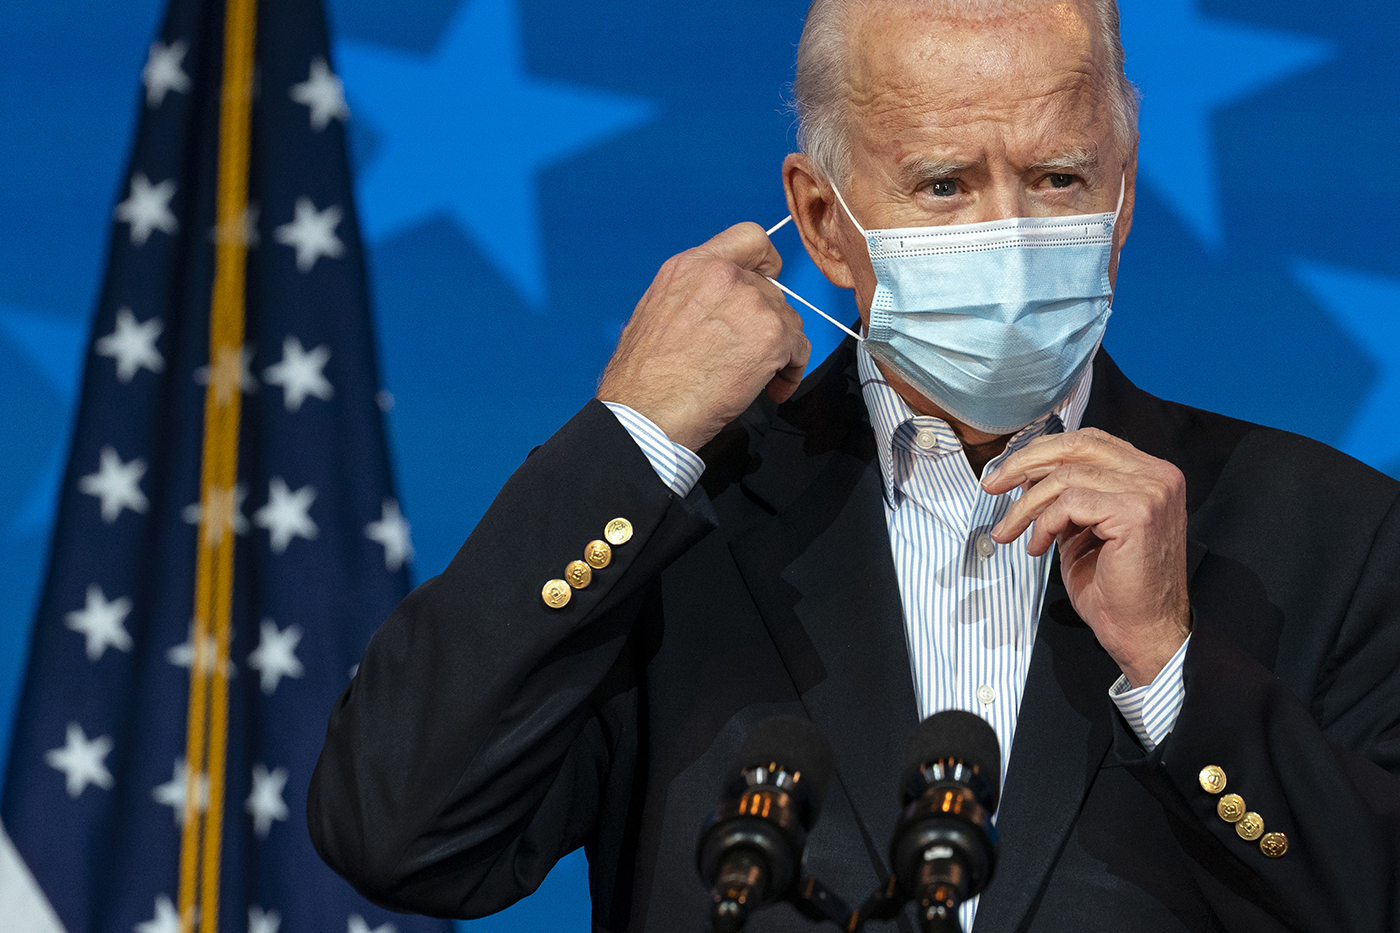 Will Biden's proposed mask mandate legally force people to wear facial coverings? - News @ Northeastern